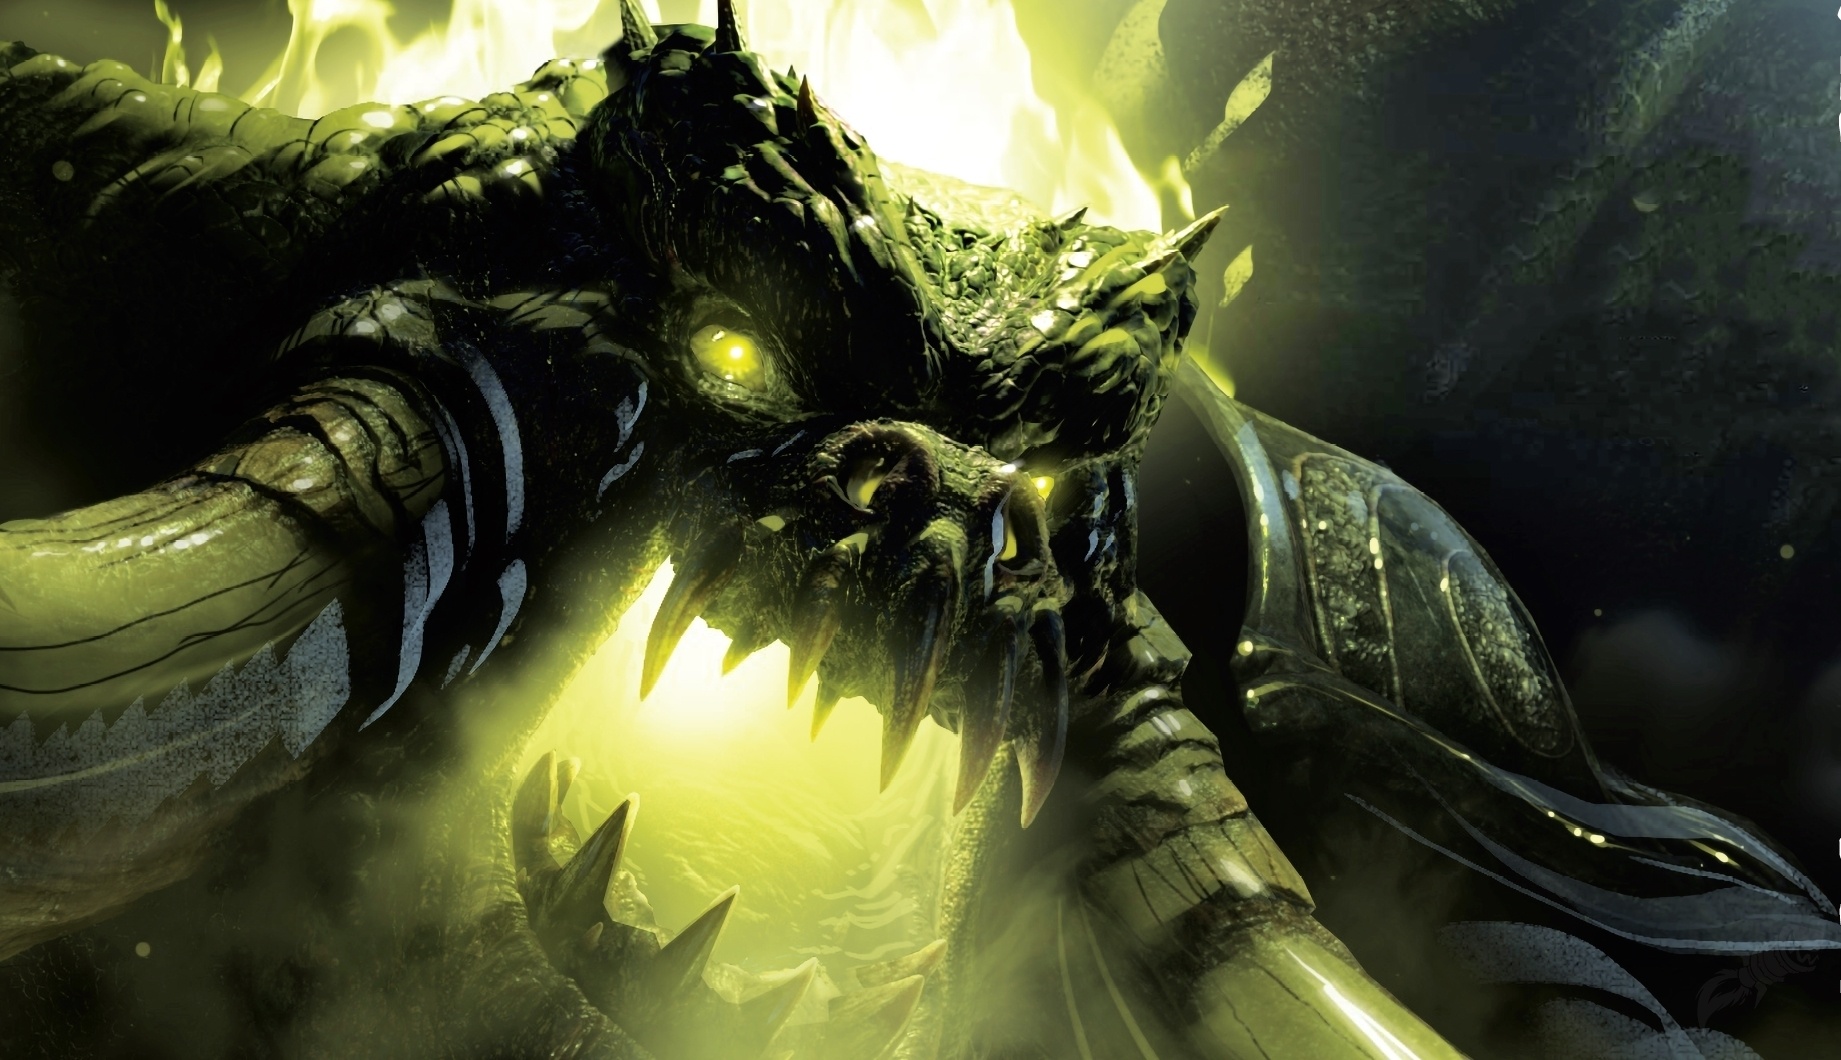 The Cinematic Art of World of Warcraft: The Wrath of the Lich King